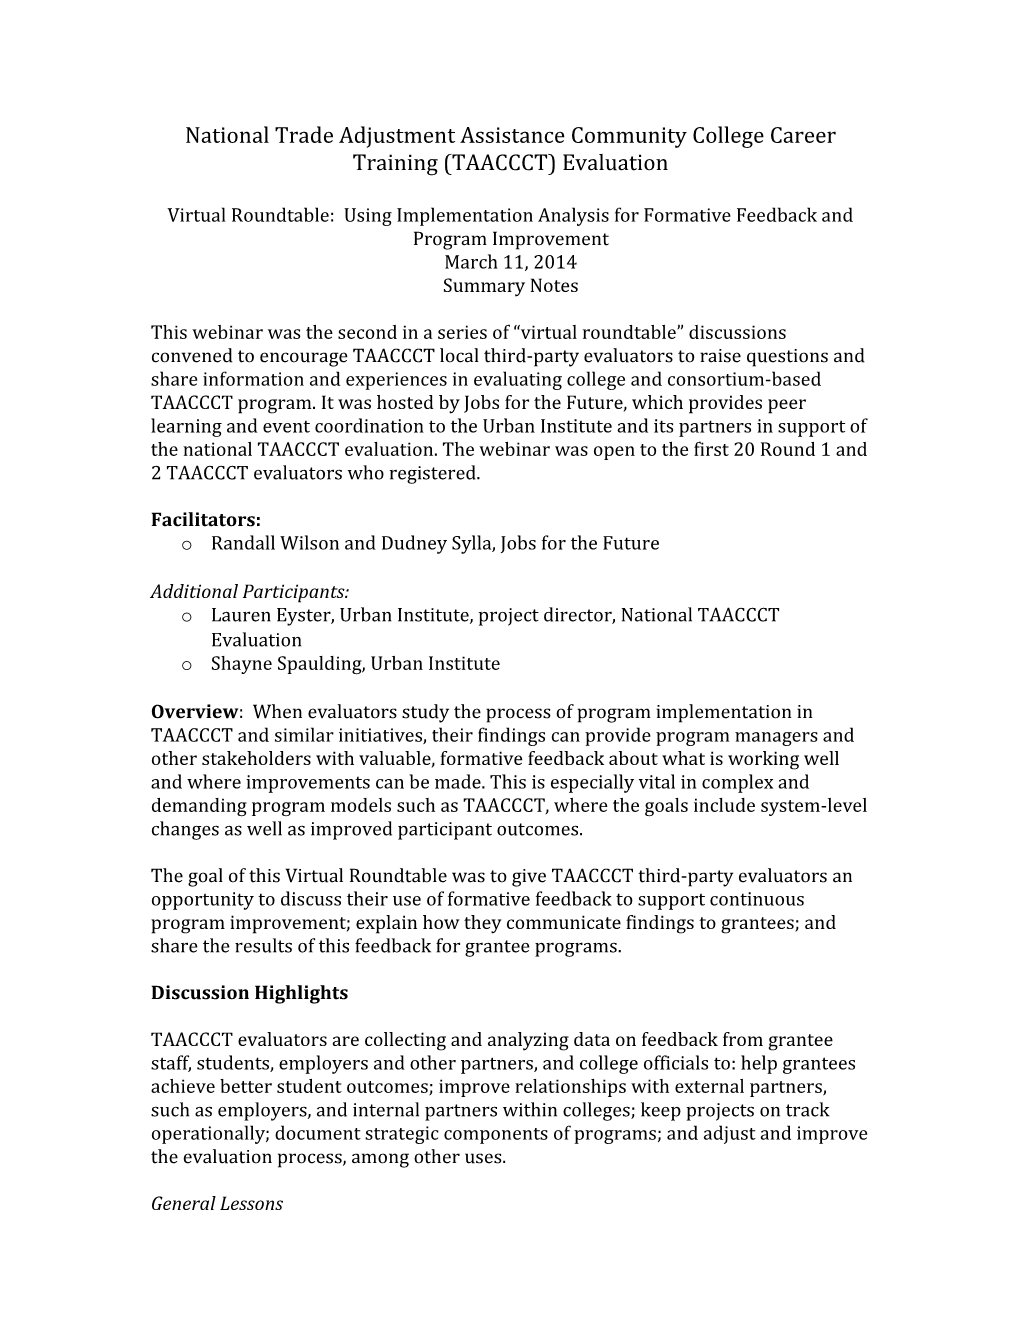 National TAACCCT Evaluation: Virtual Roundtable with 3Rd Party Evaluators